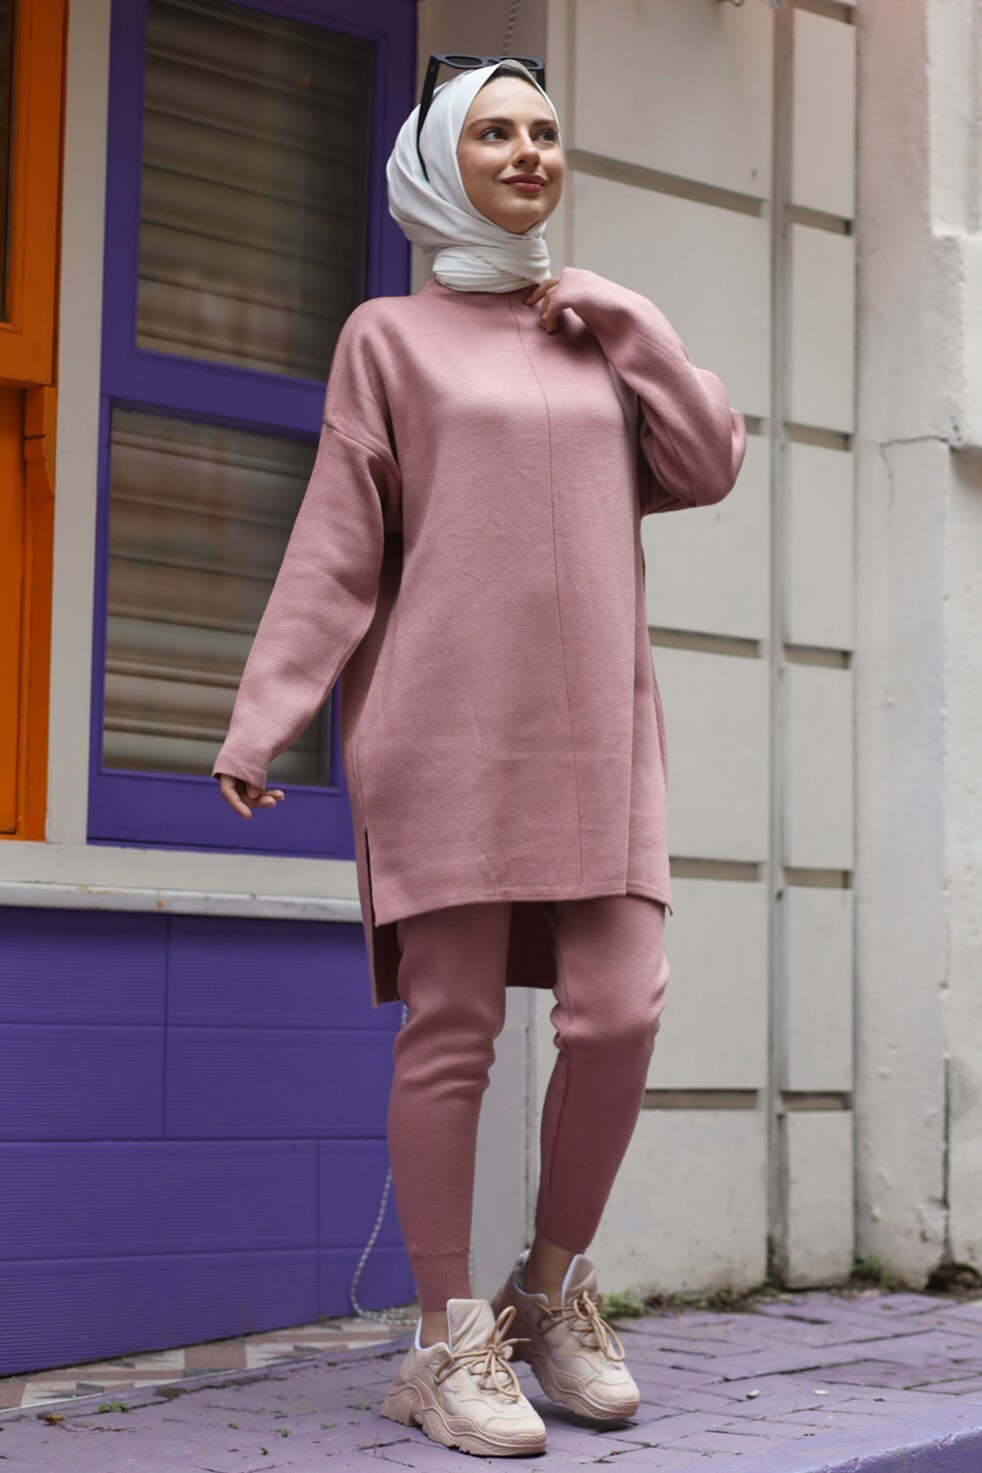 Modest Loungewear - Tight Joggers with Loose Sweatshirt - Pink